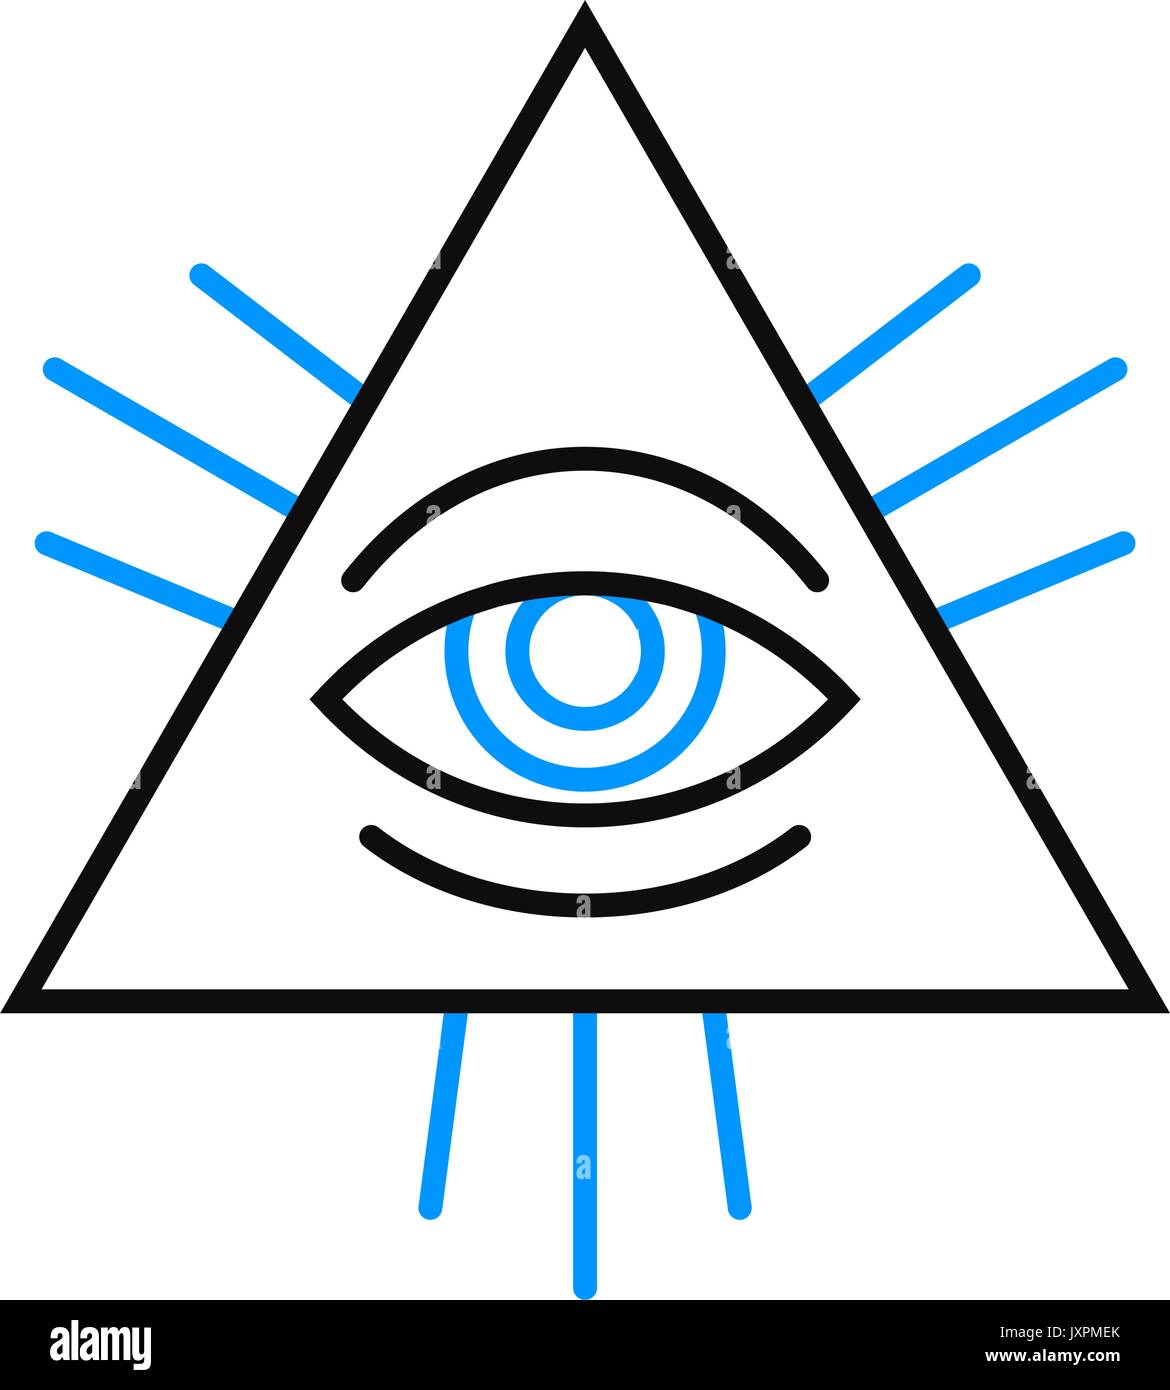 Isolated single human eye symbol inside a pyramid with blue lines for pupil and rays over white, vector illustration Stock Vector